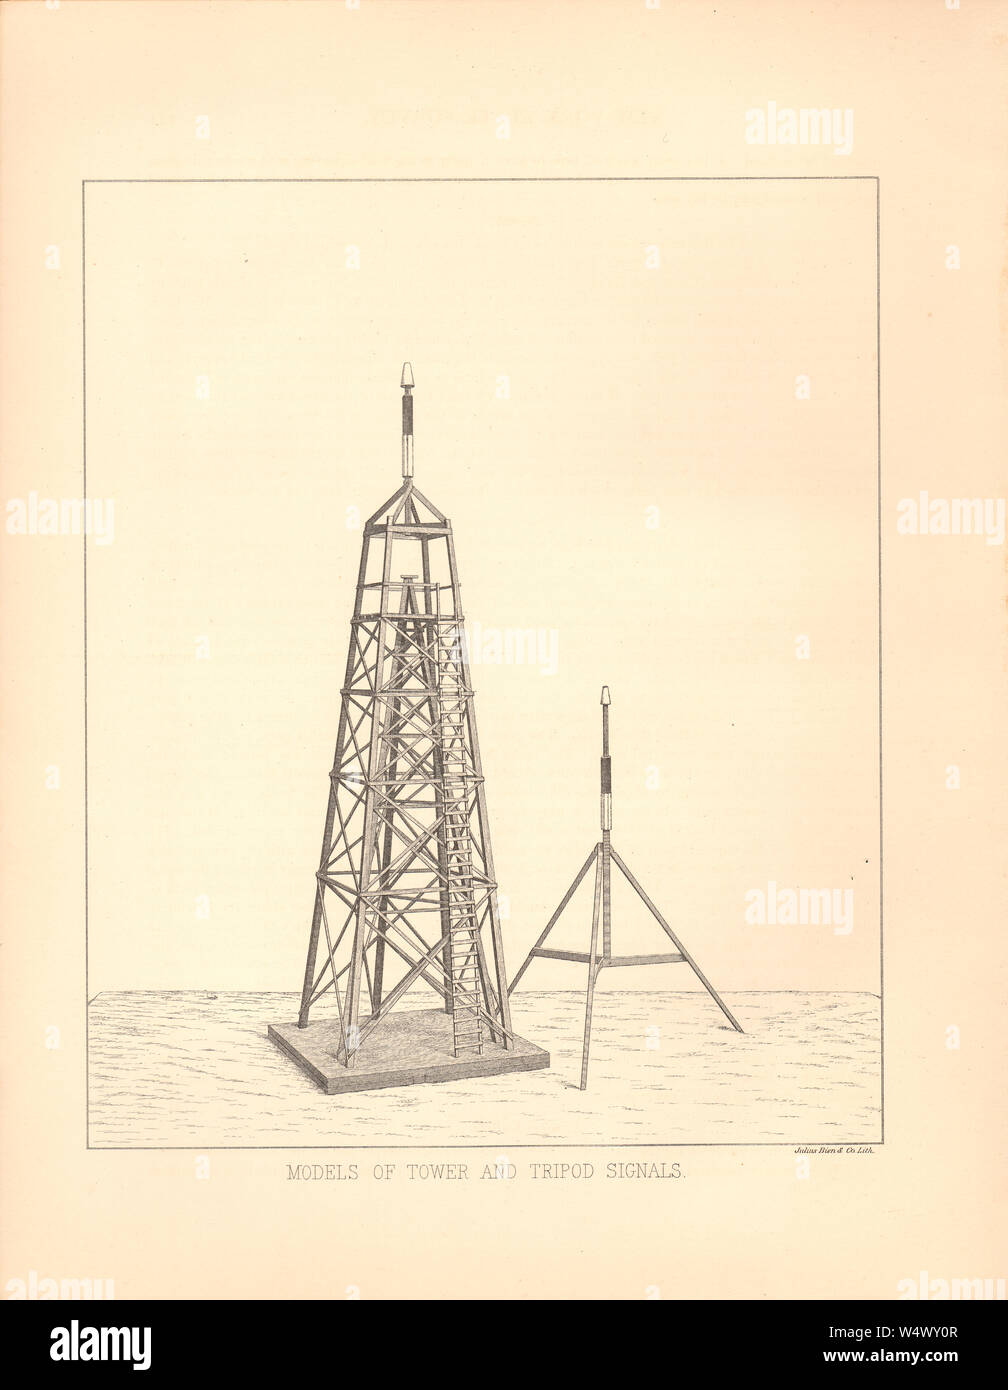 Models of Tripod and Tower Signals - Antiquarian bookplate from a set of plates showing 19th century survey tools in a NY State Survey Report Stock Photo